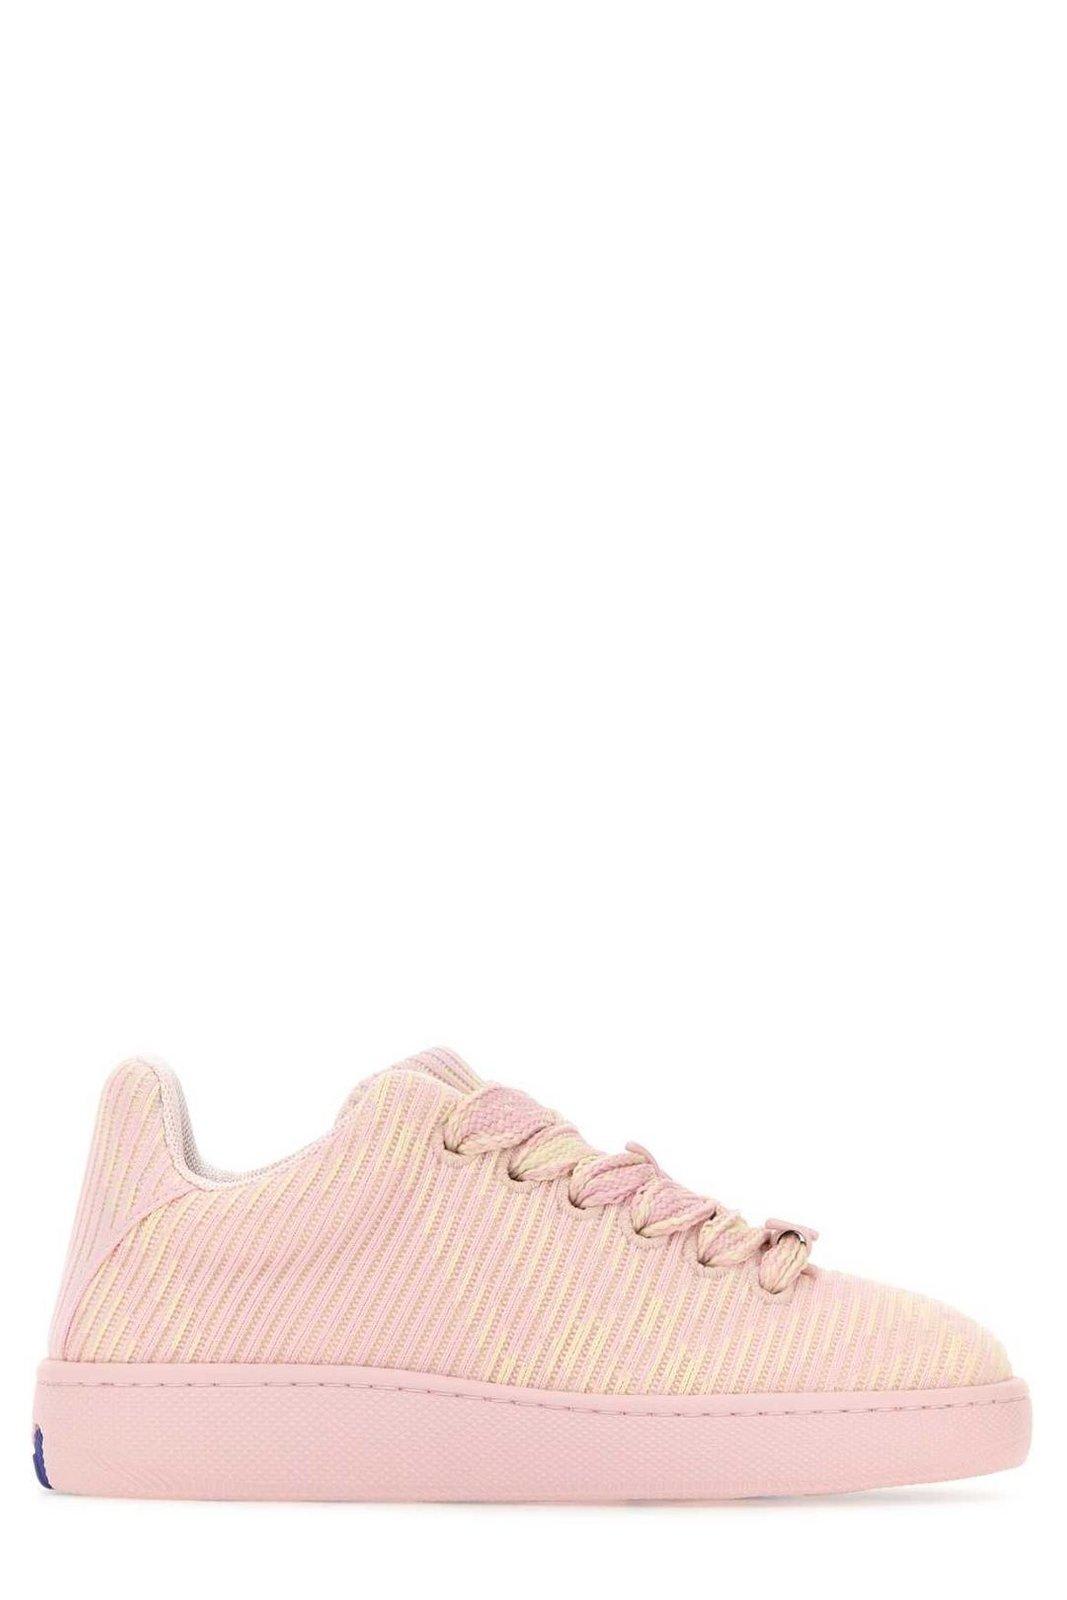 Burberry Box Checked Low-top Sneakers In Cameo Ip Check